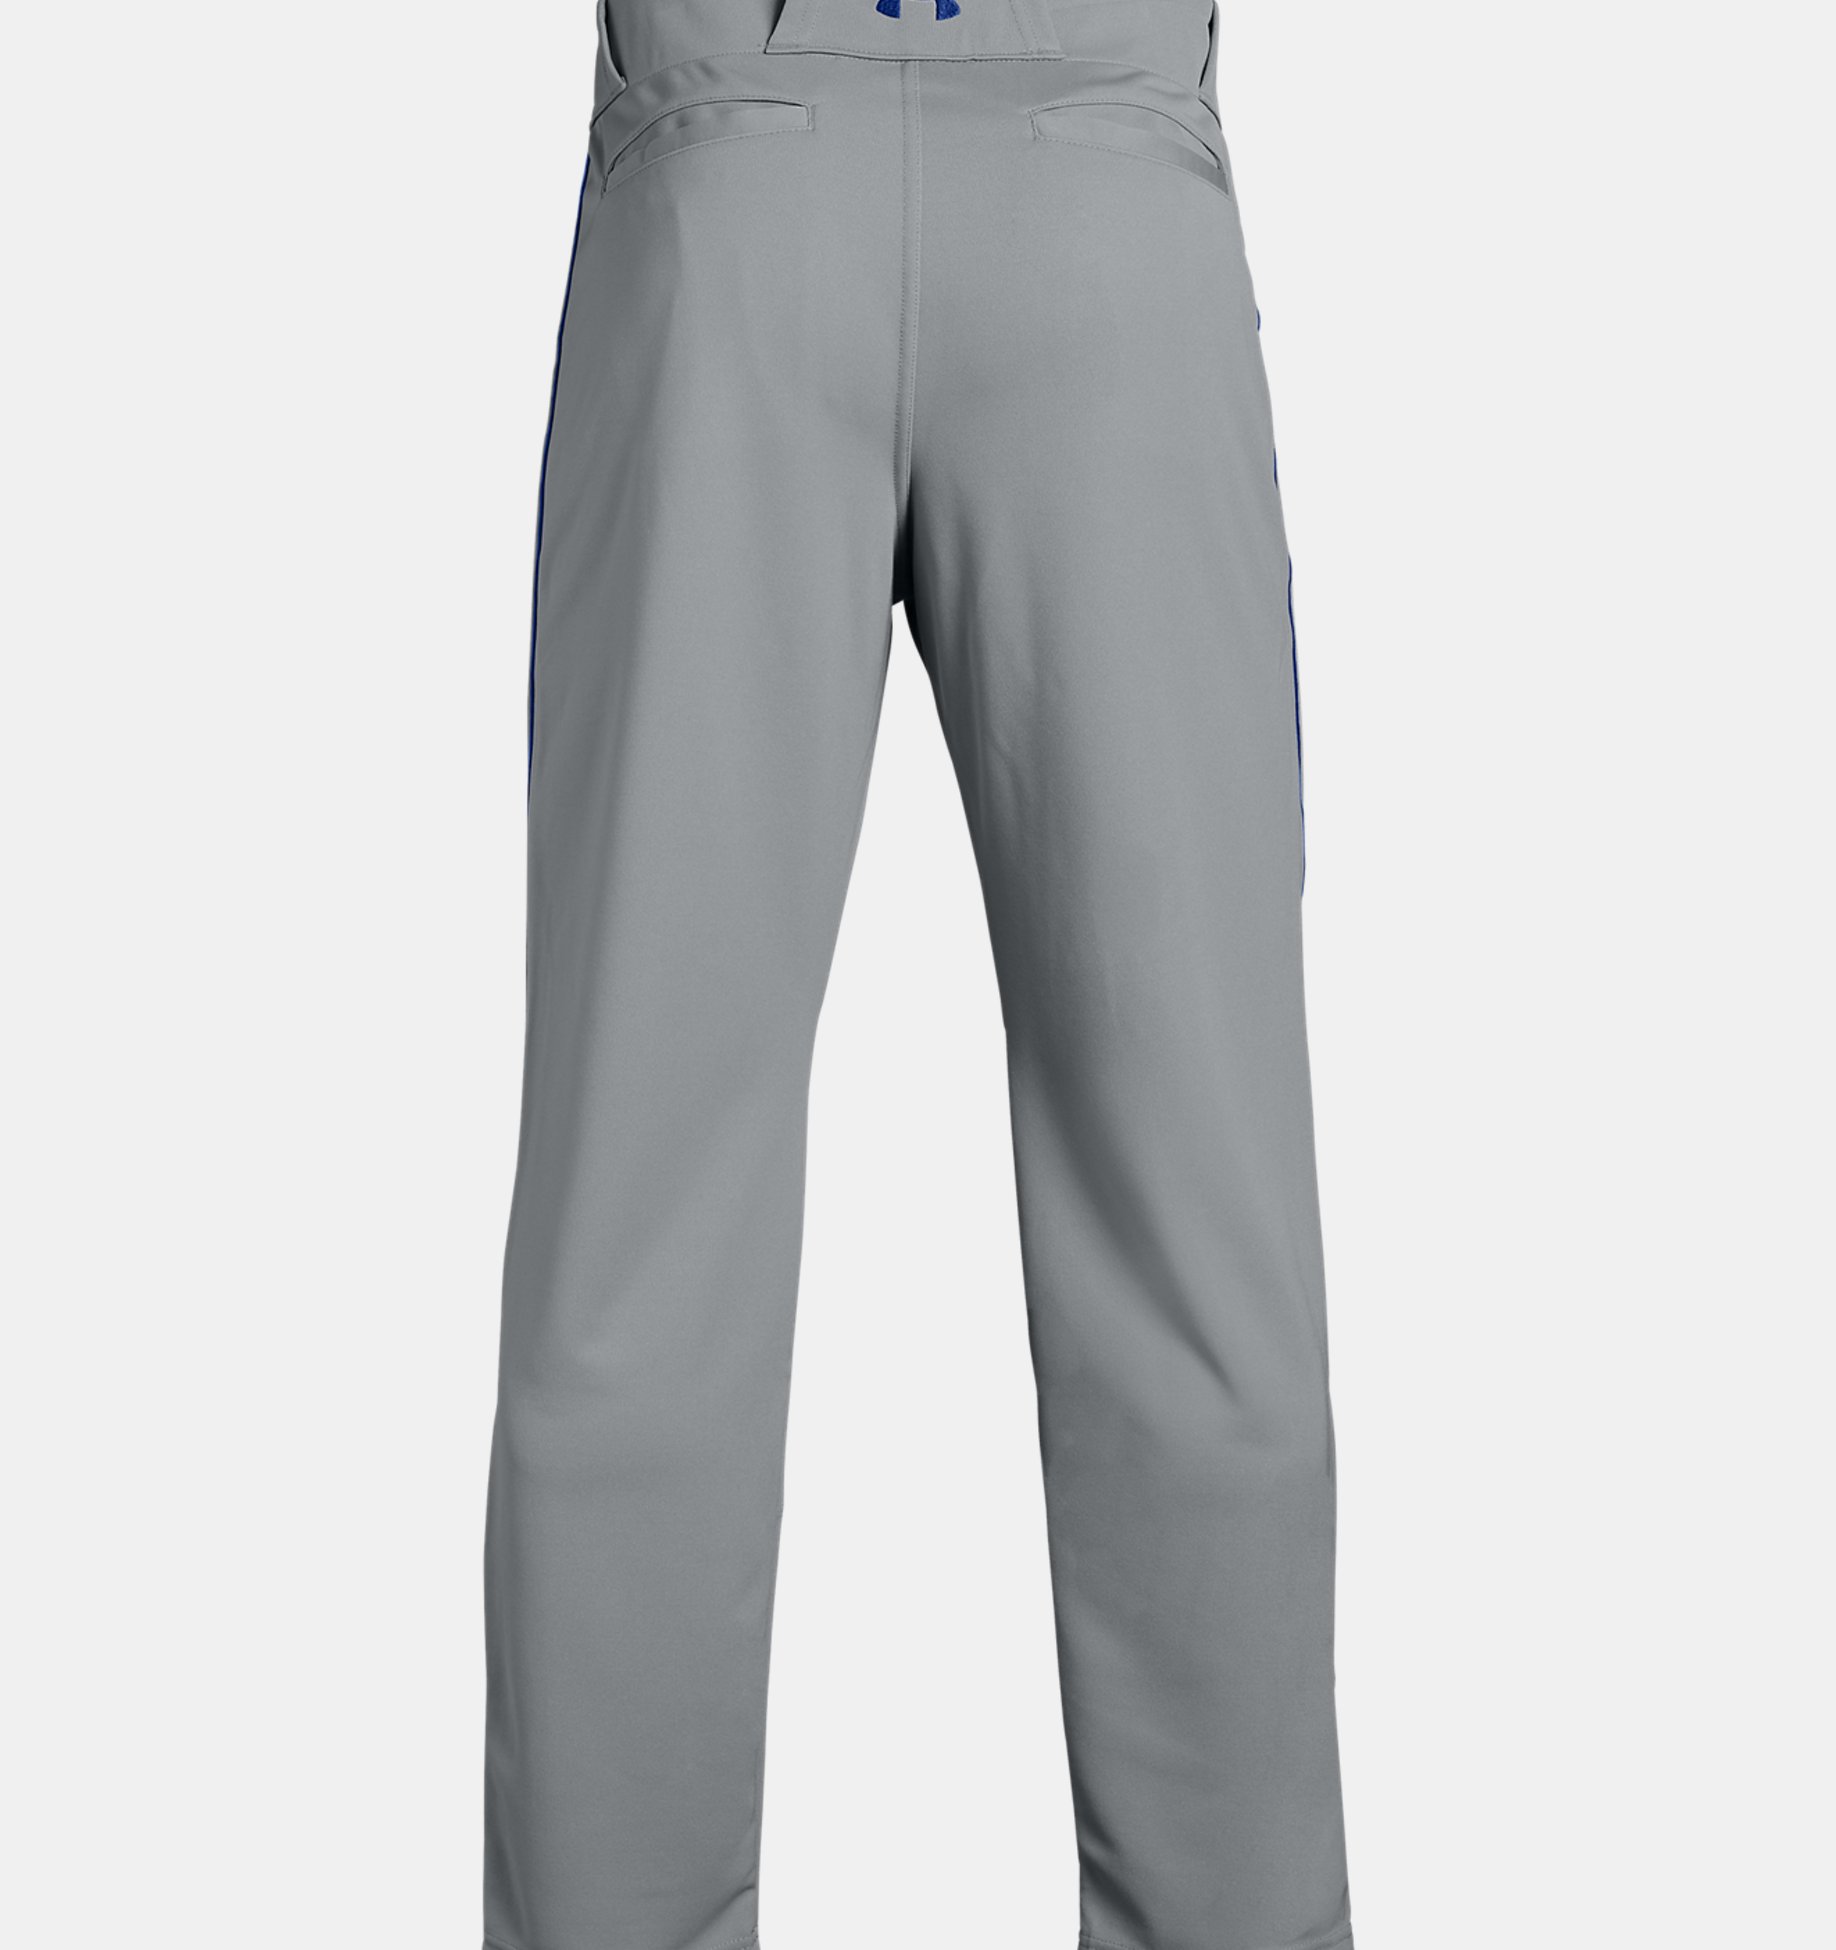 Under Armour Utility Relaxed Piped Mens Baseball Pants w/Braid Piping 1317259 